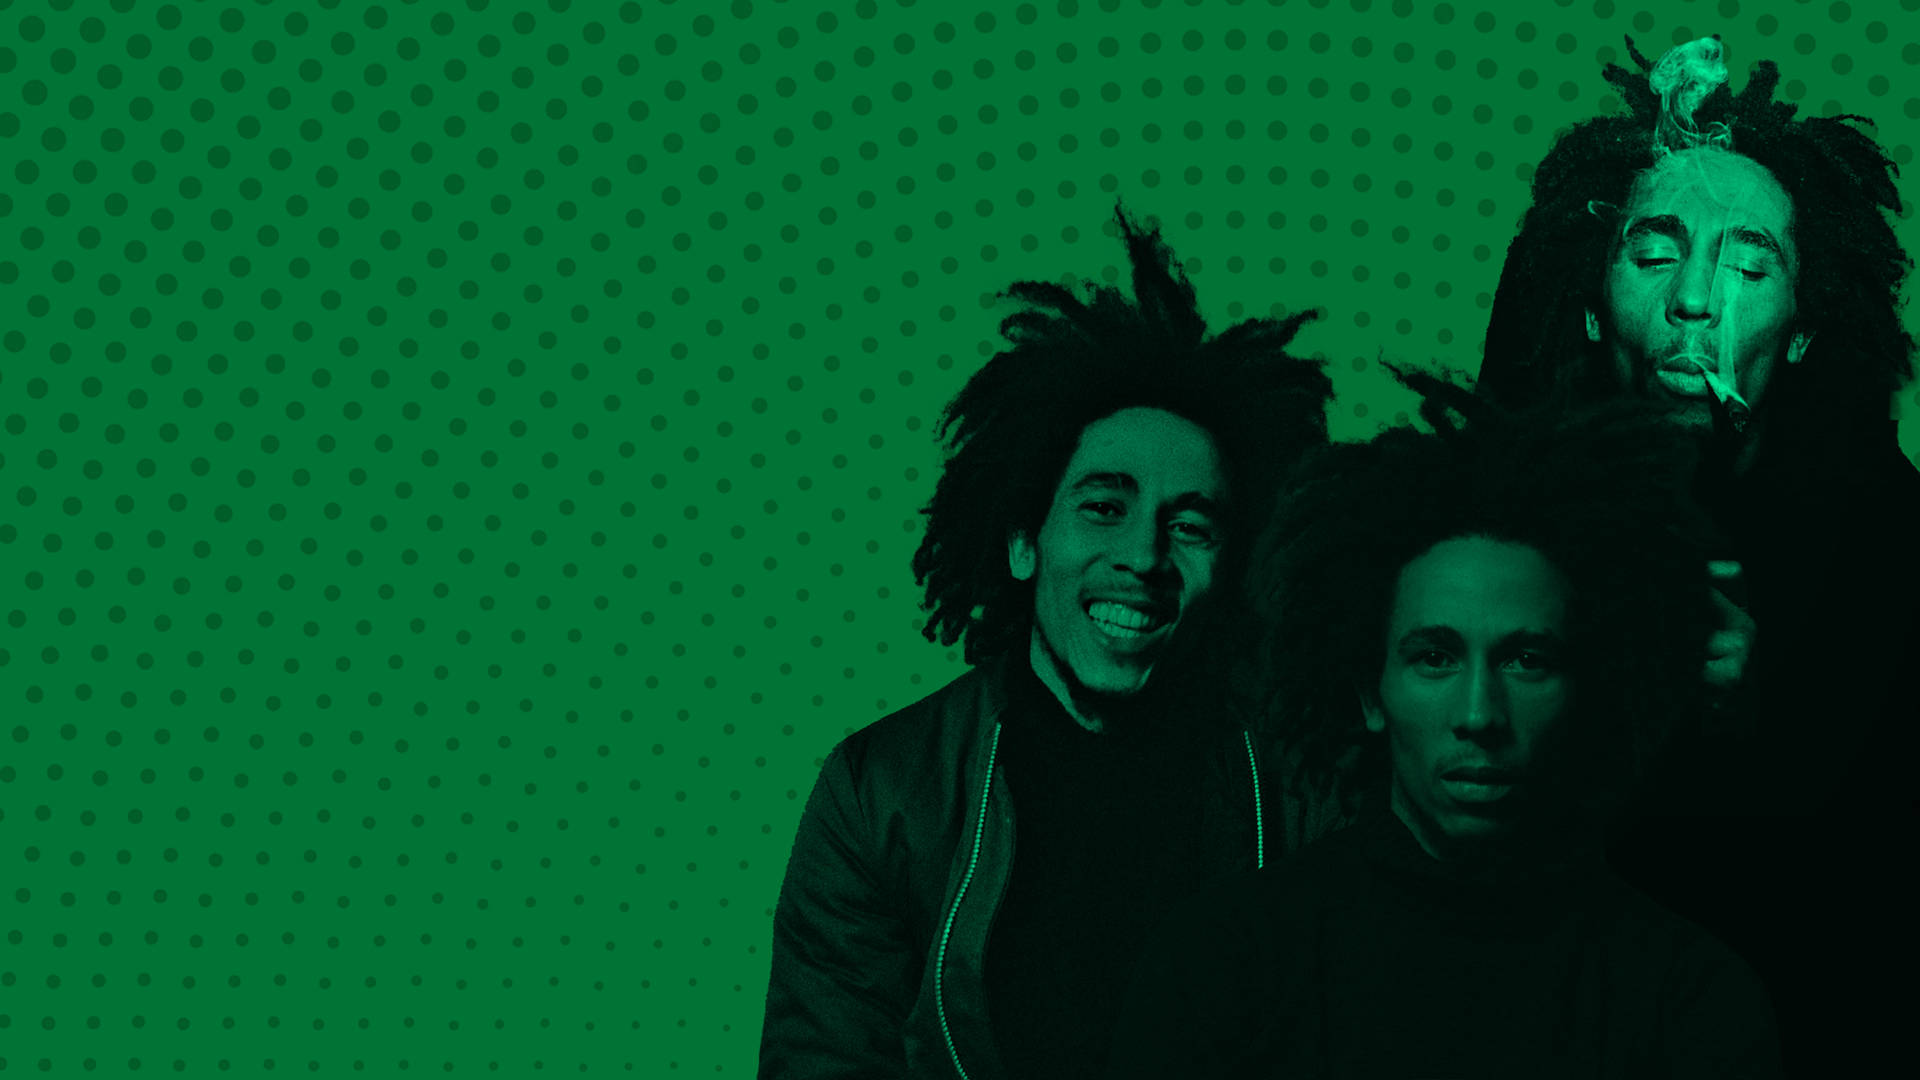 Bob Marley Dotted Green Background Wallpaper